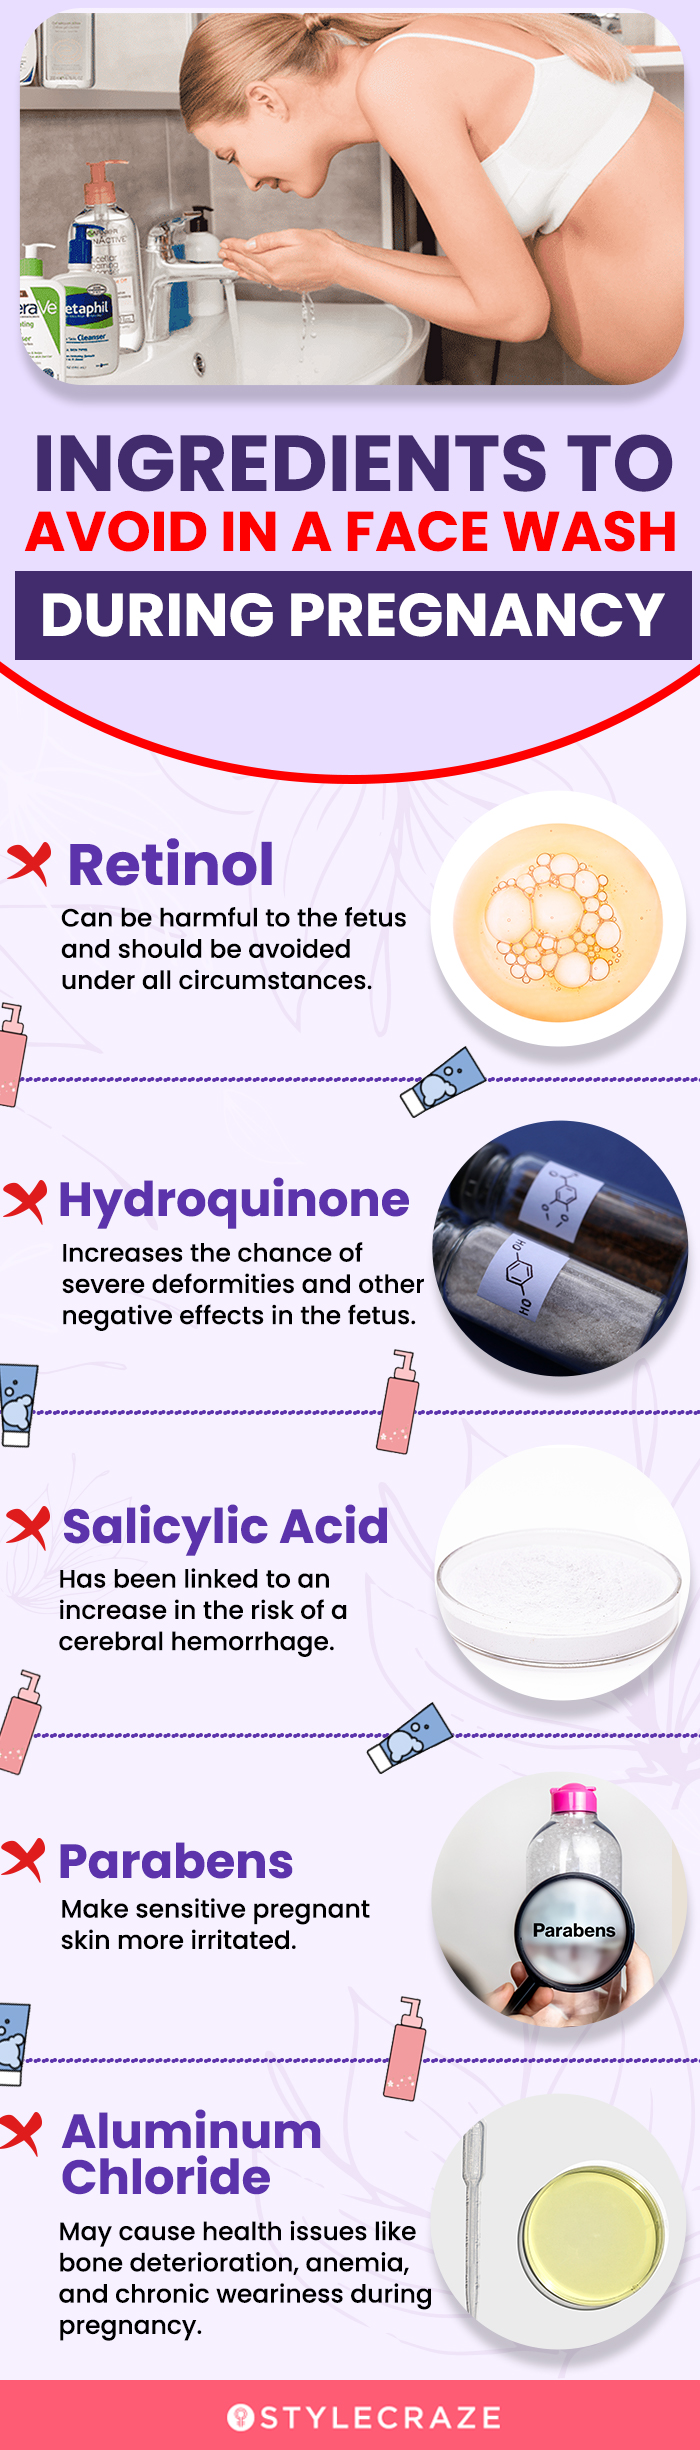 Ingredients To Avoid In A Face Wash During Pregnancy (infographic)